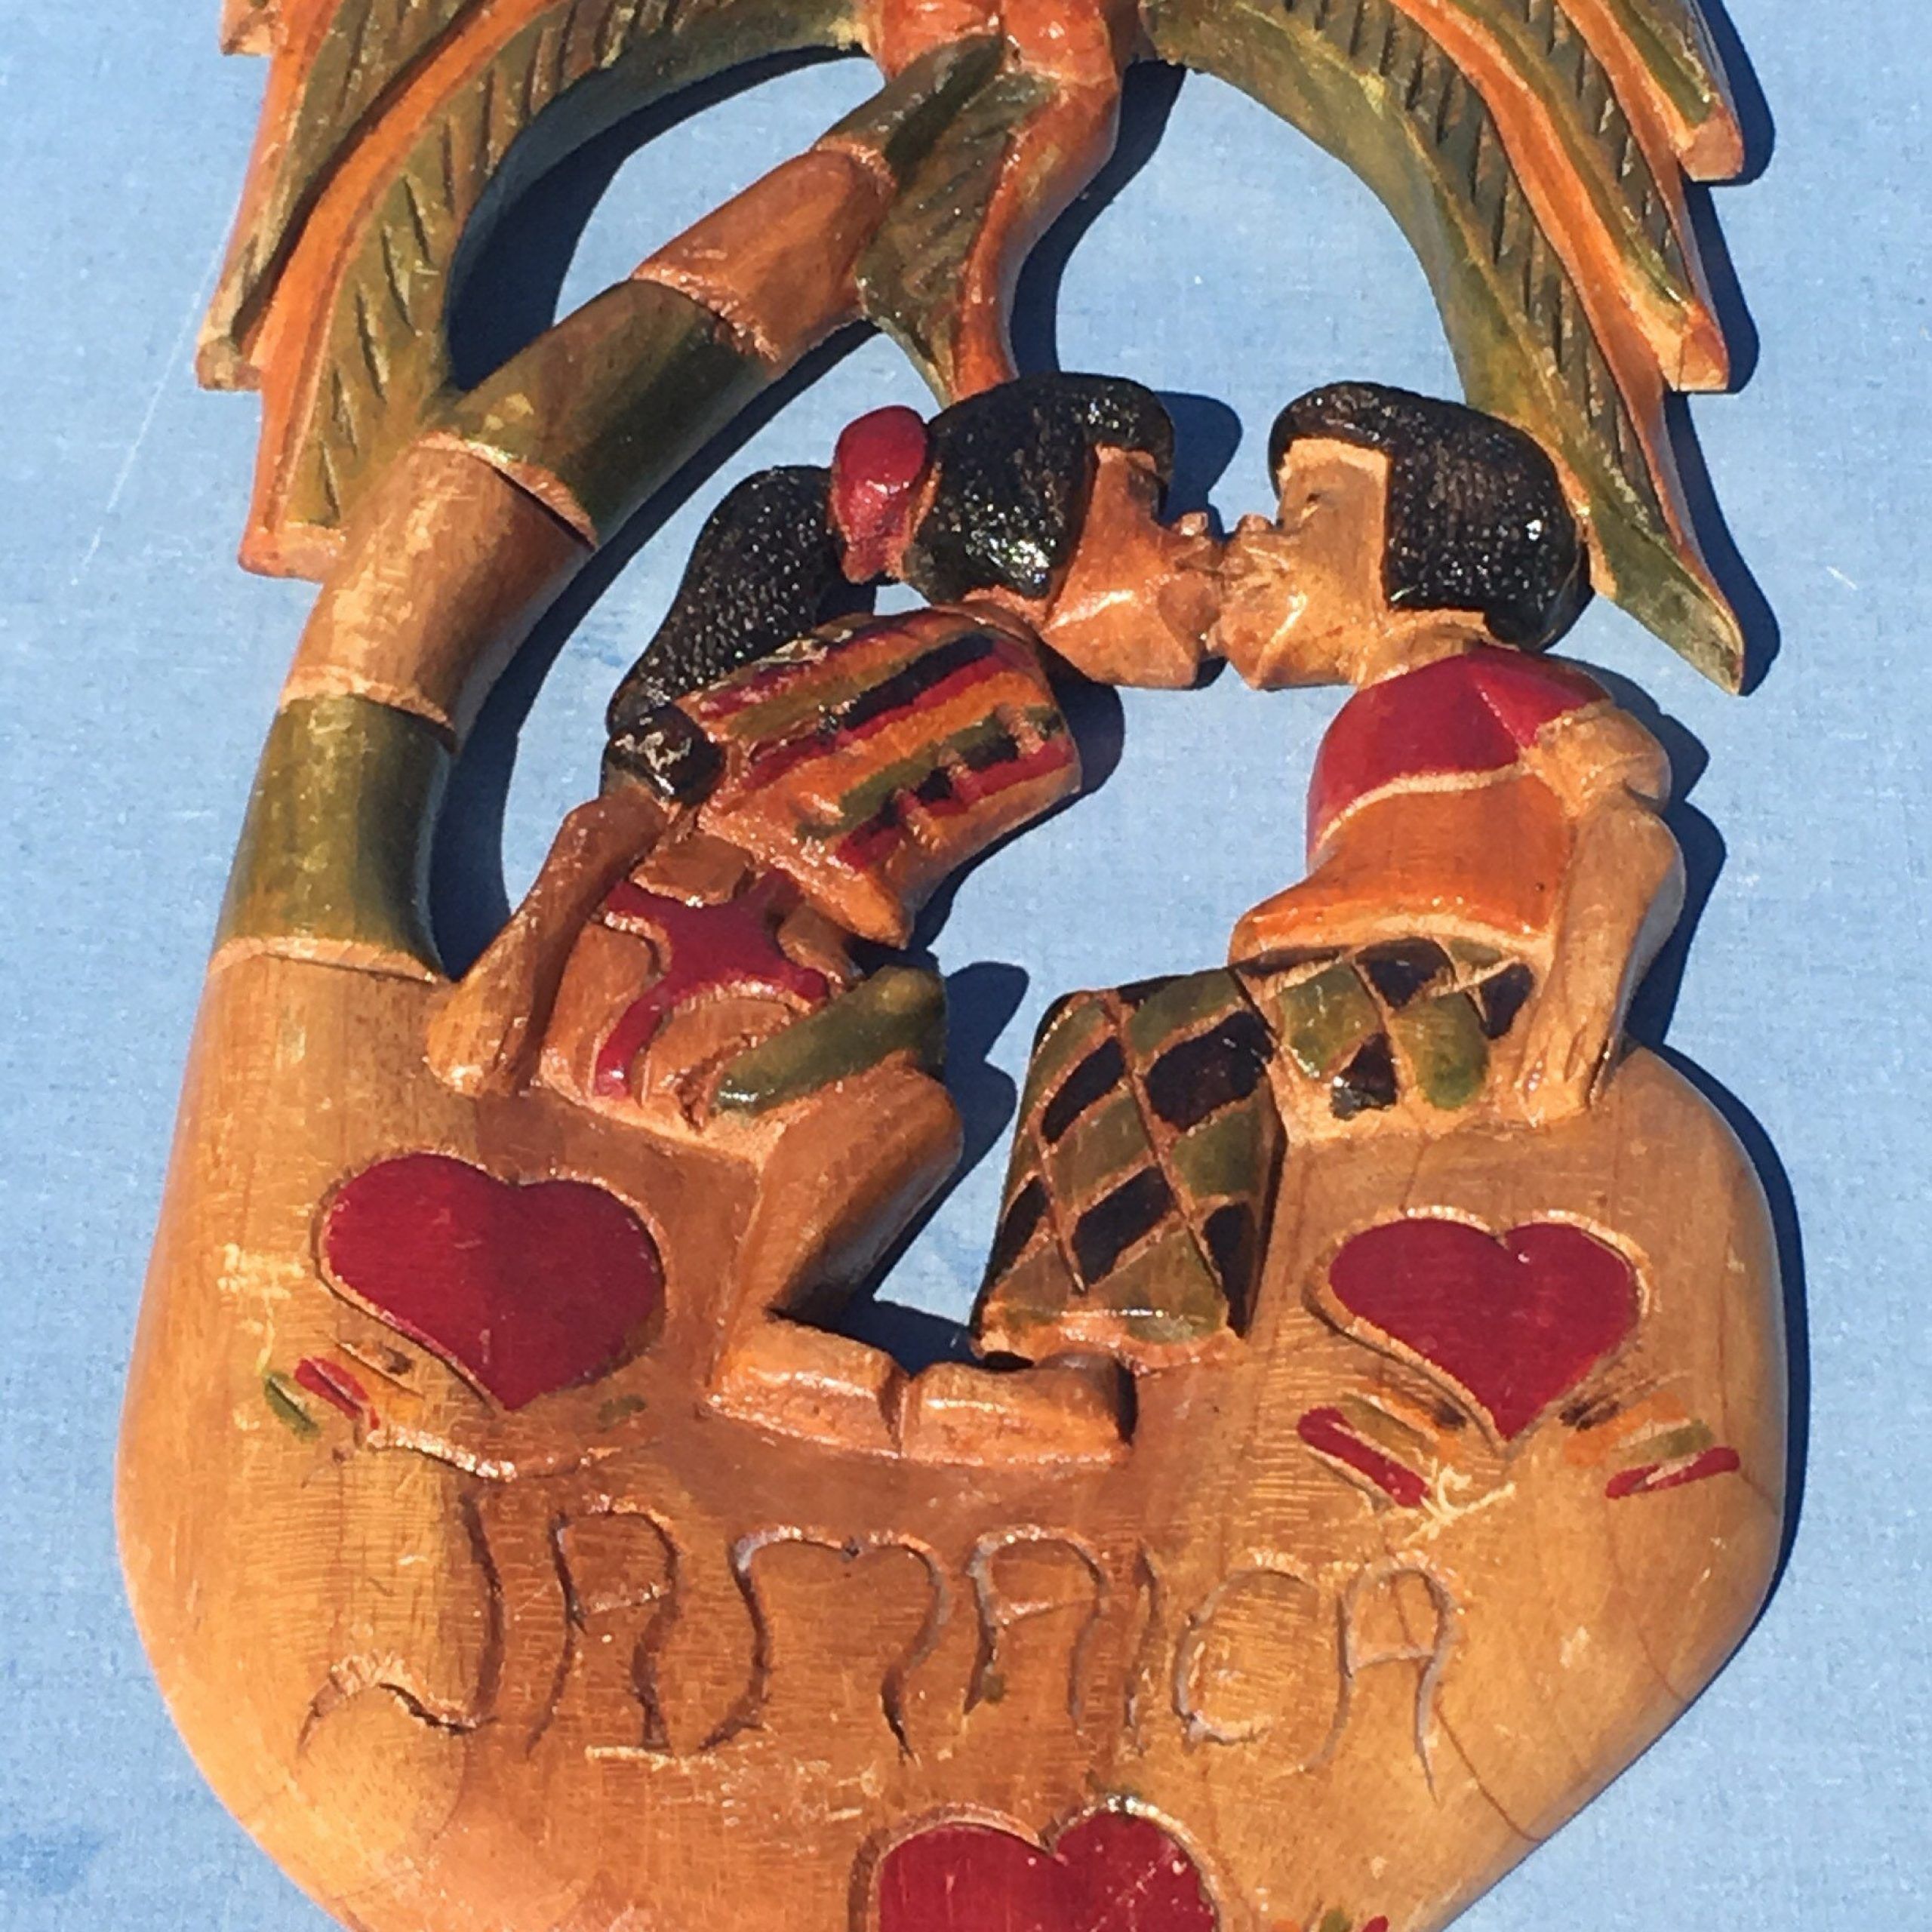 Vintage Wood Carving, Tropical Lovers Wall Decor, Carved Regarding Tropical Wood Wall Art (View 9 of 15)